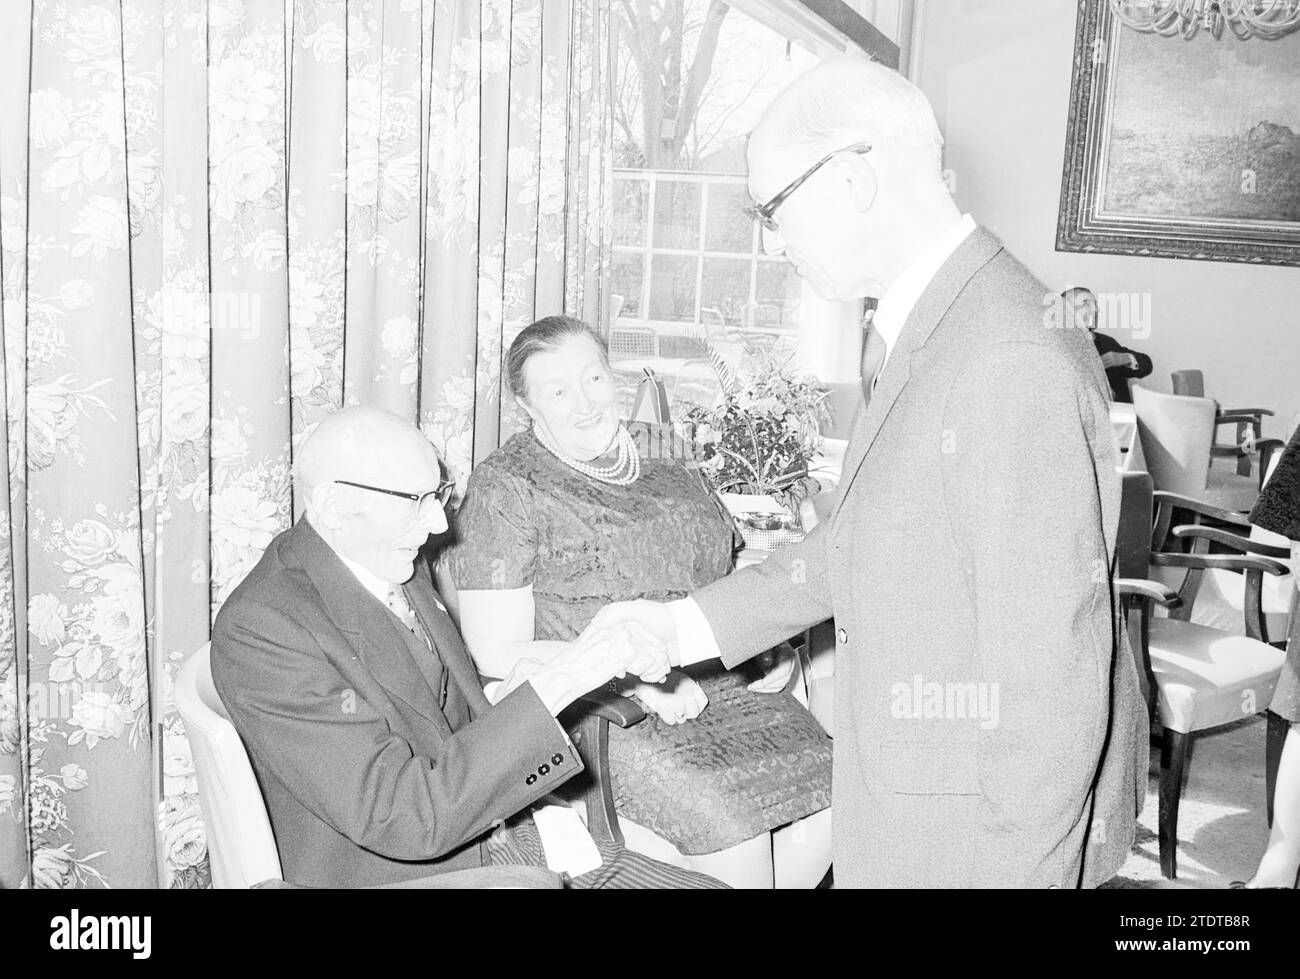 100 year old Mr. Bulters, Centenarians, one hundred years, 02-04-1969, Whizgle News from the Past, Tailored for the Future. Explore historical narratives, Dutch The Netherlands agency image with a modern perspective, bridging the gap between yesterday's events and tomorrow's insights. A timeless journey shaping the stories that shape our future Stock Photo